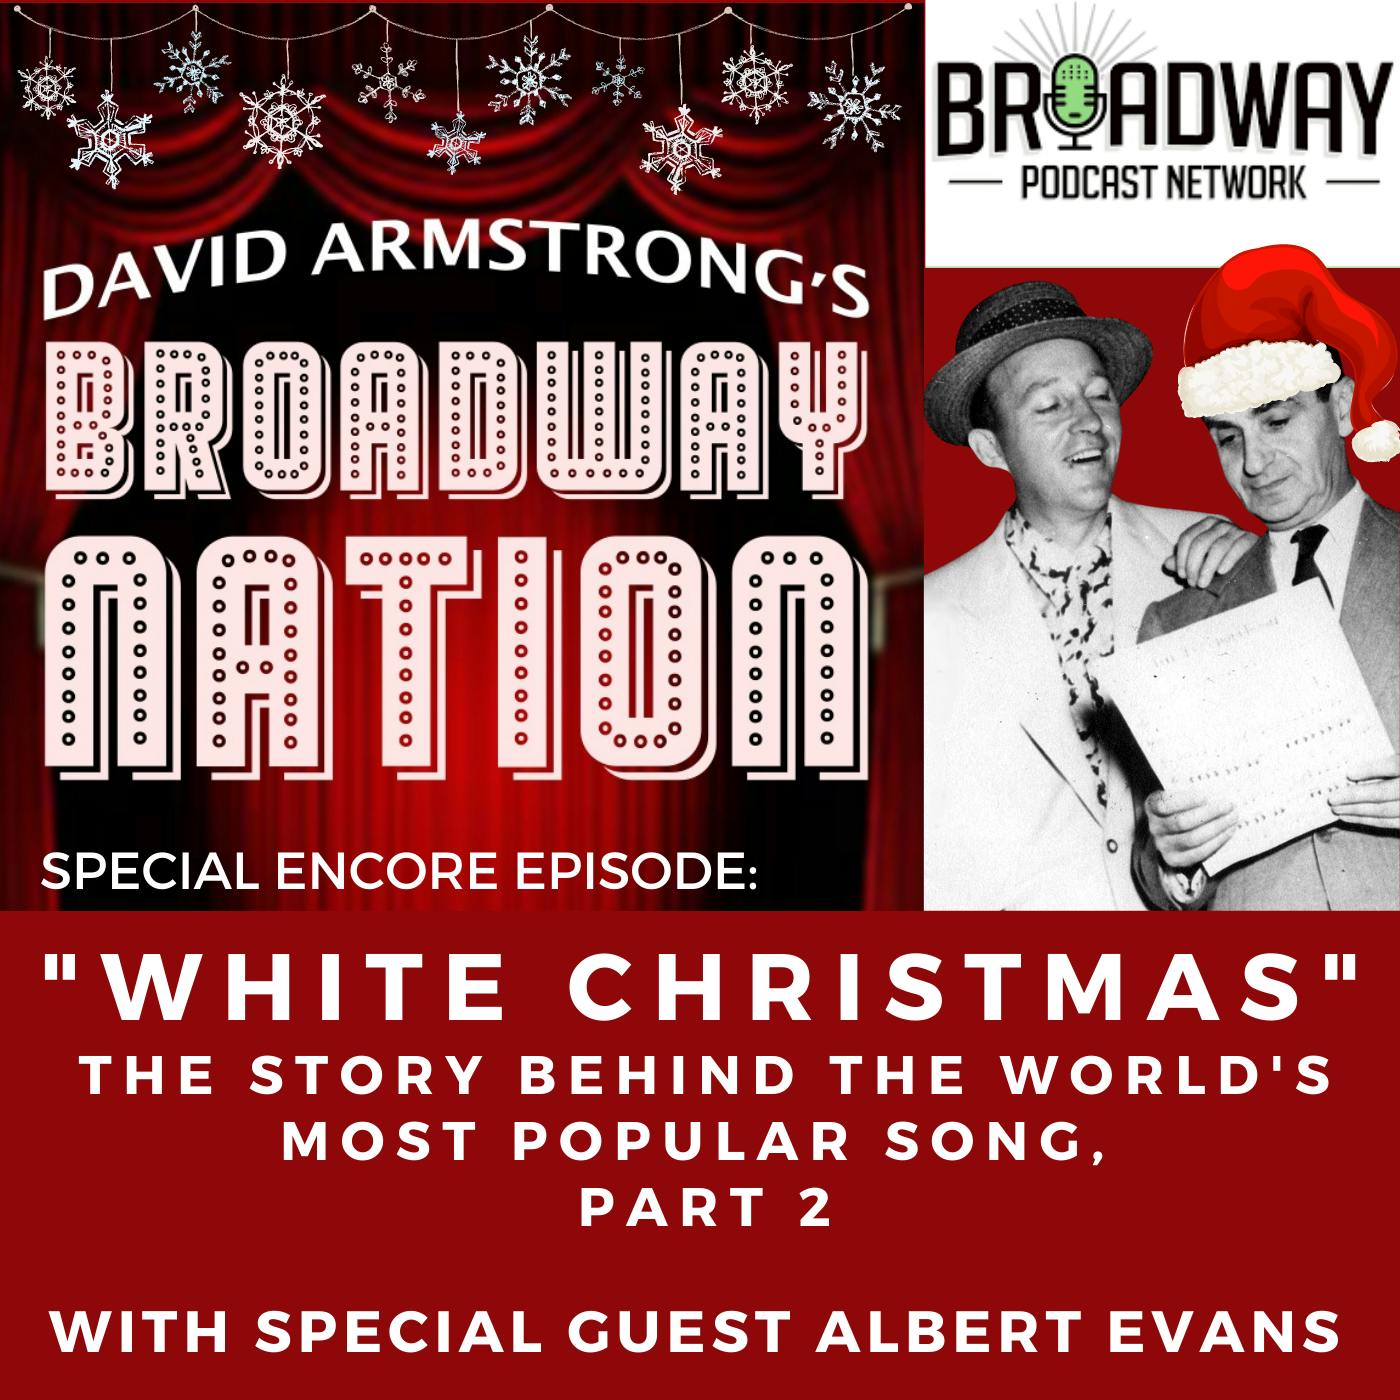 SPECIAL ENCORE EPISODE: "WHITE CHRISTMAS" -- THE STORY OF AMERICA'S MOST POPULAR SONG, part 2 Image